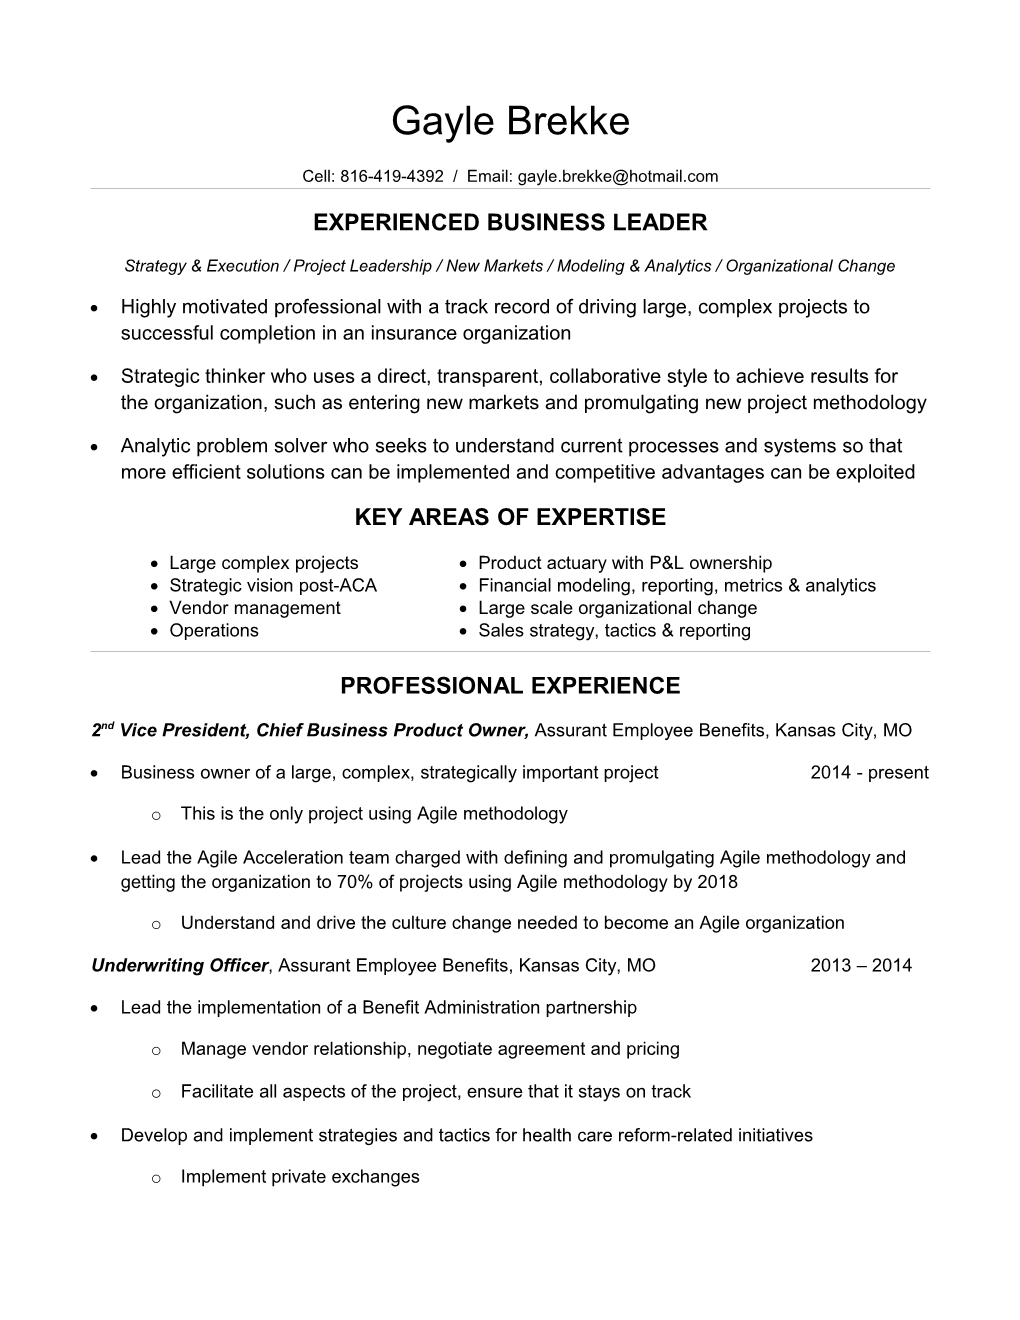 Experienced Business Leader